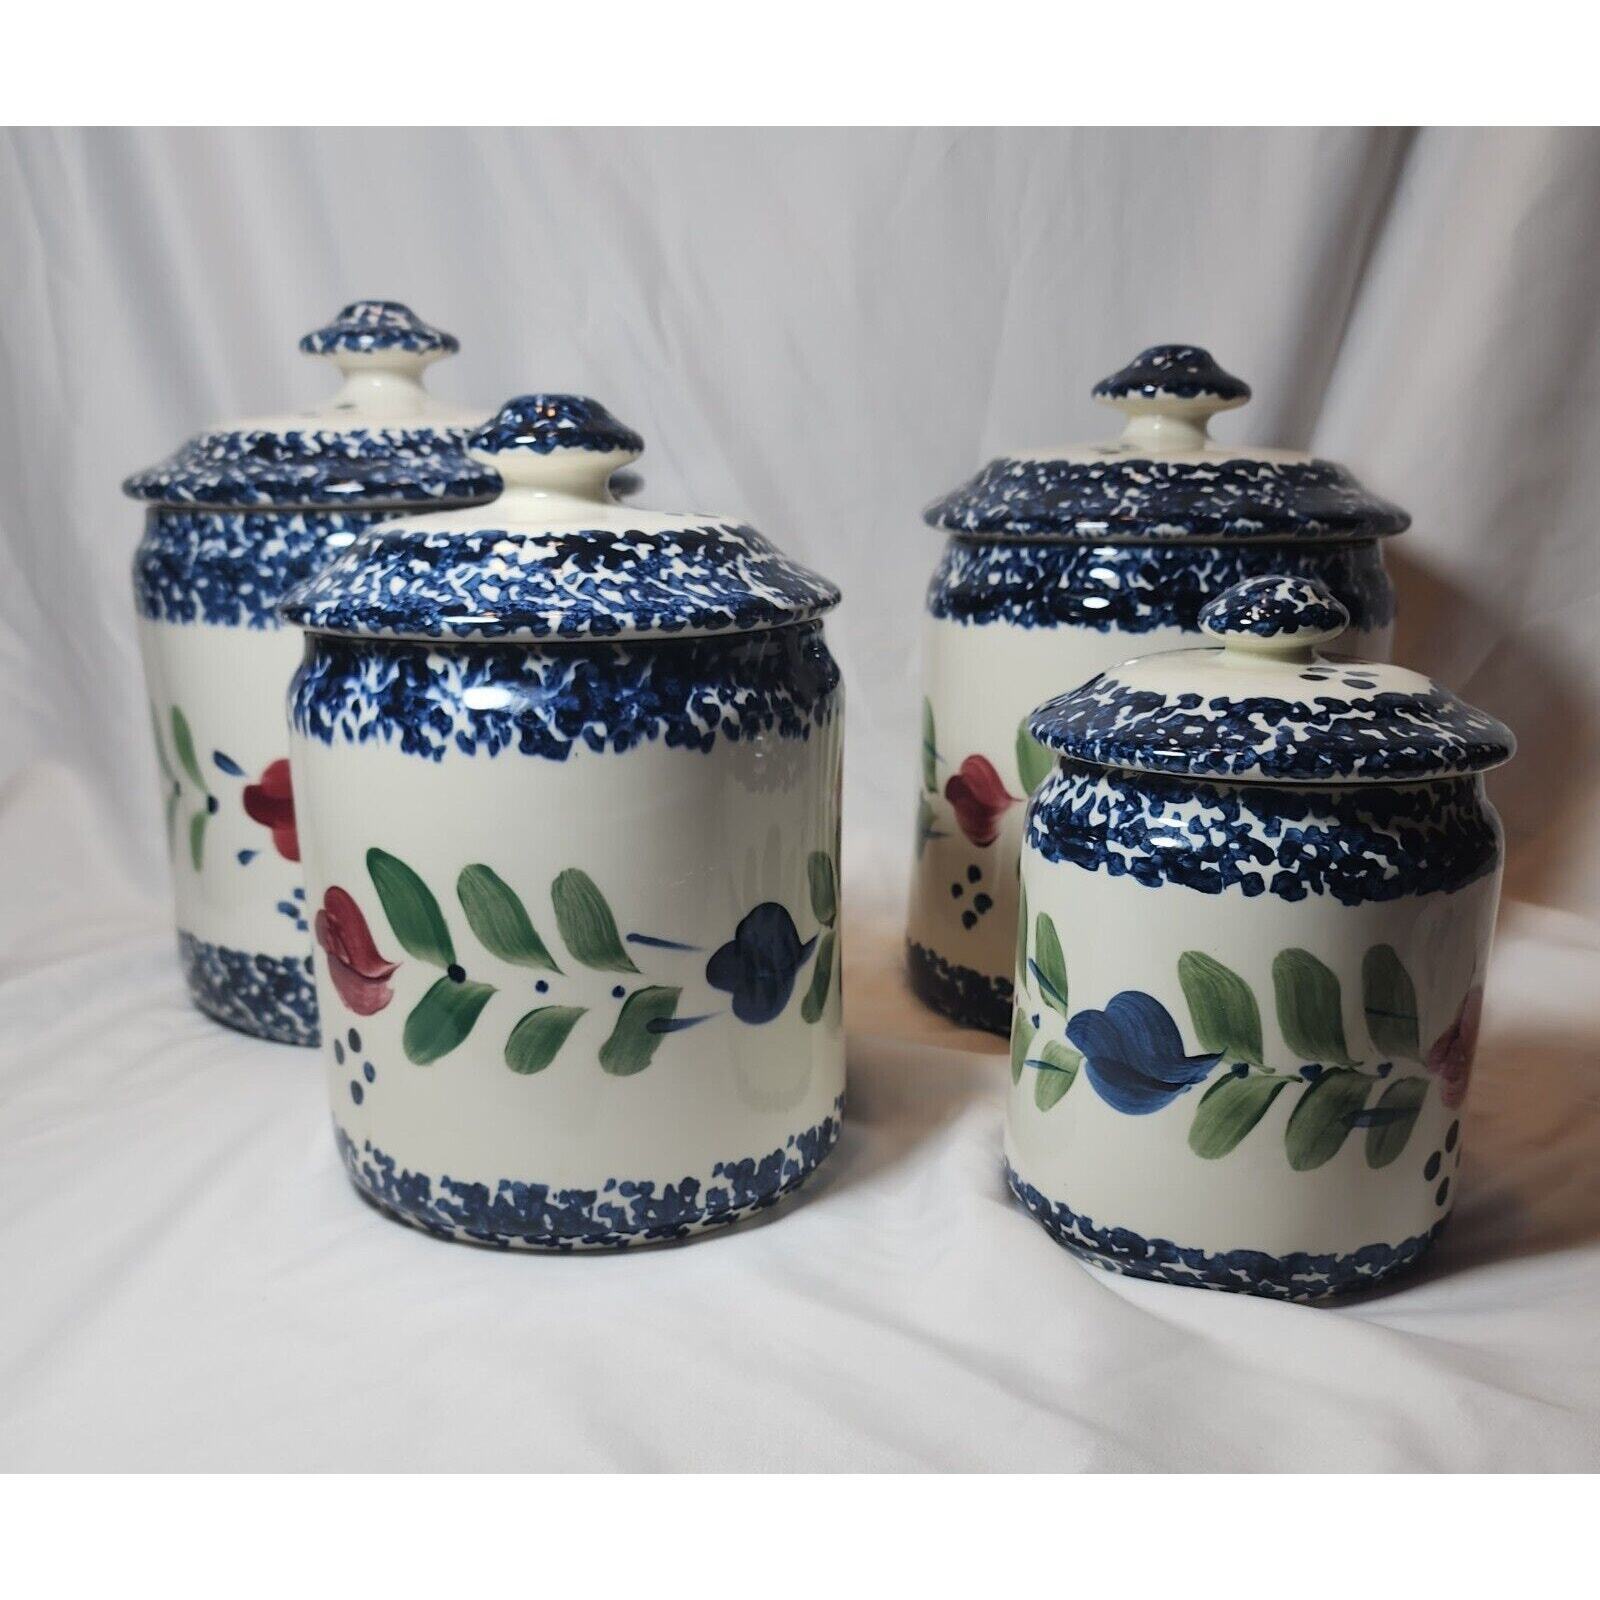 Gail Pittman 4 Ceramic Lidded Canisters 1988 Signed 8.5